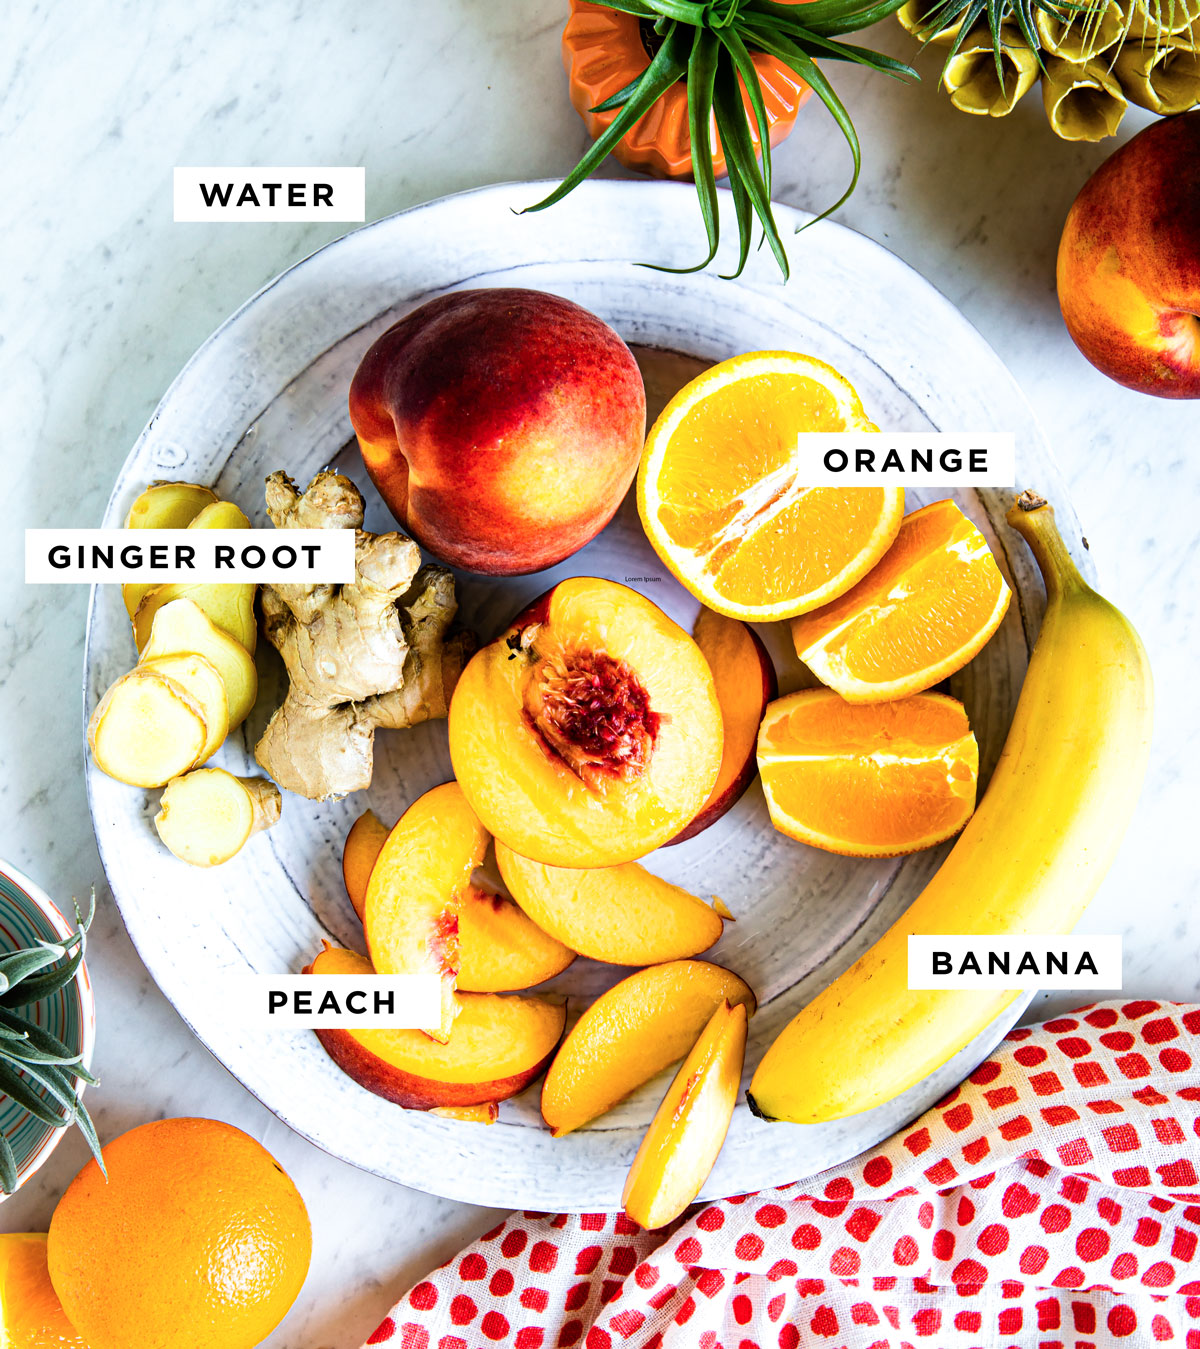 labeled ingredients to make a peach smoothie including orange, ginger root, peach and banana.